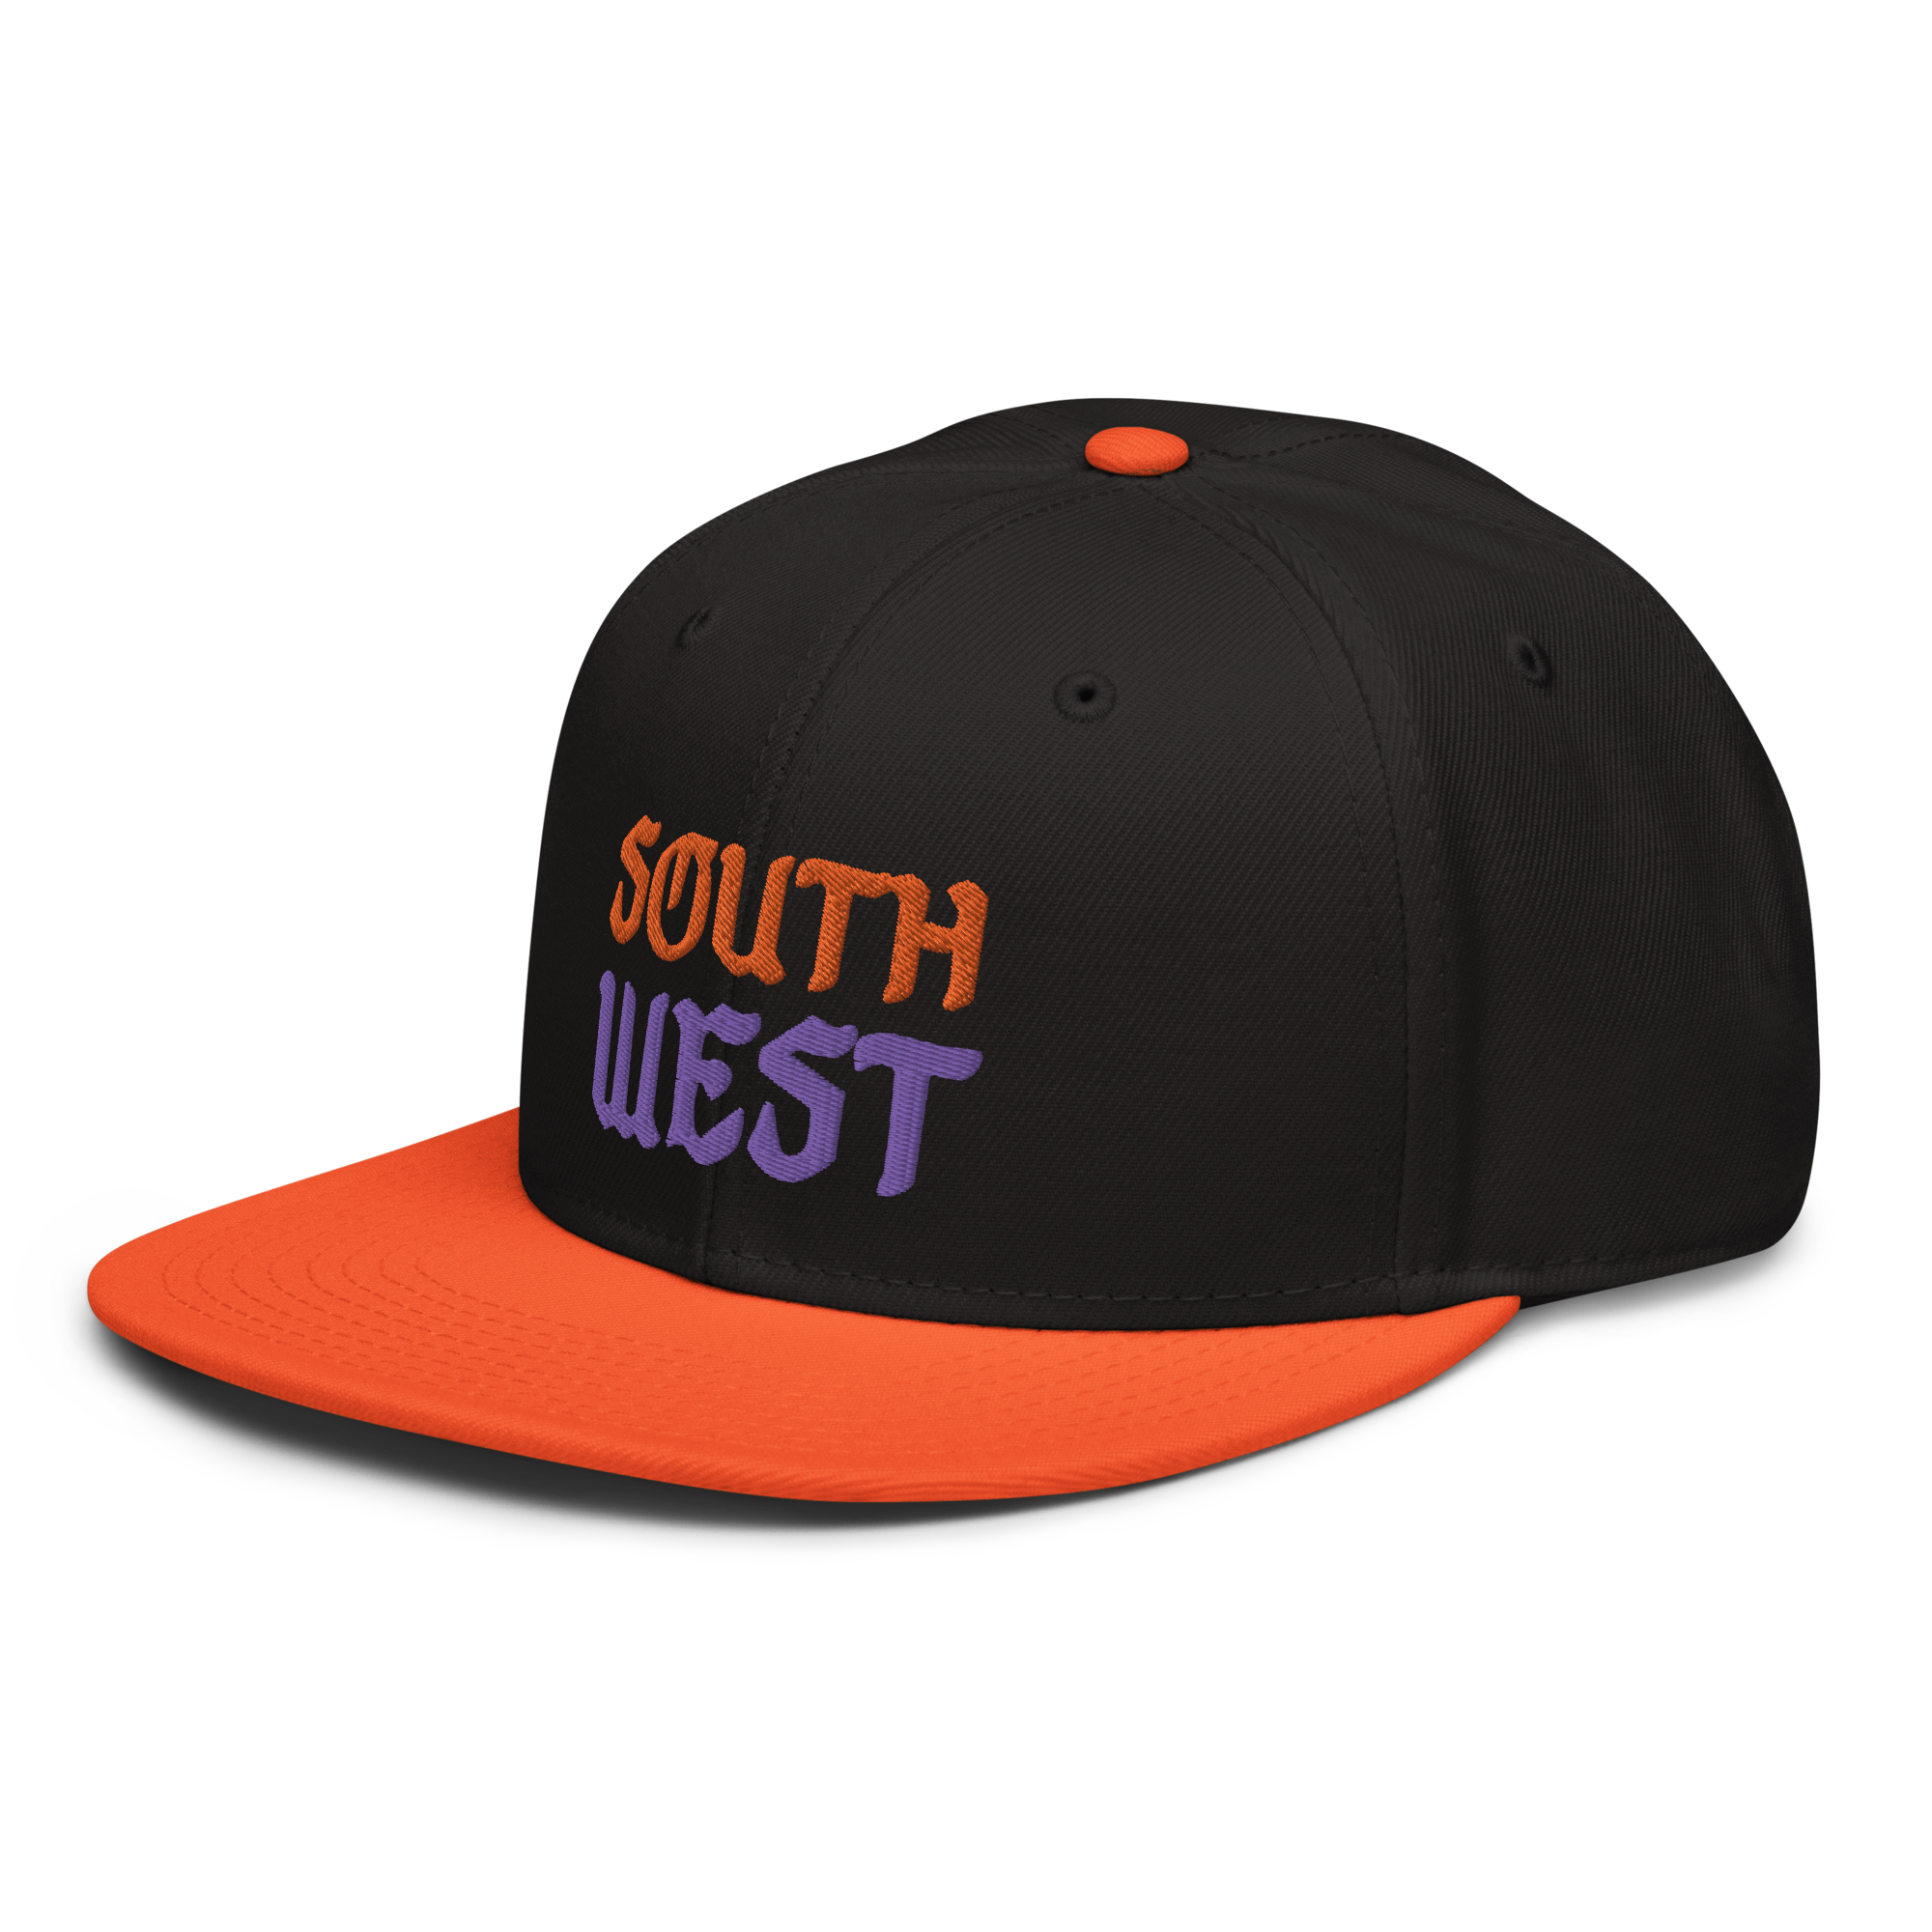 Hat Outfitters Mountain SouthWest Snapback – Organ